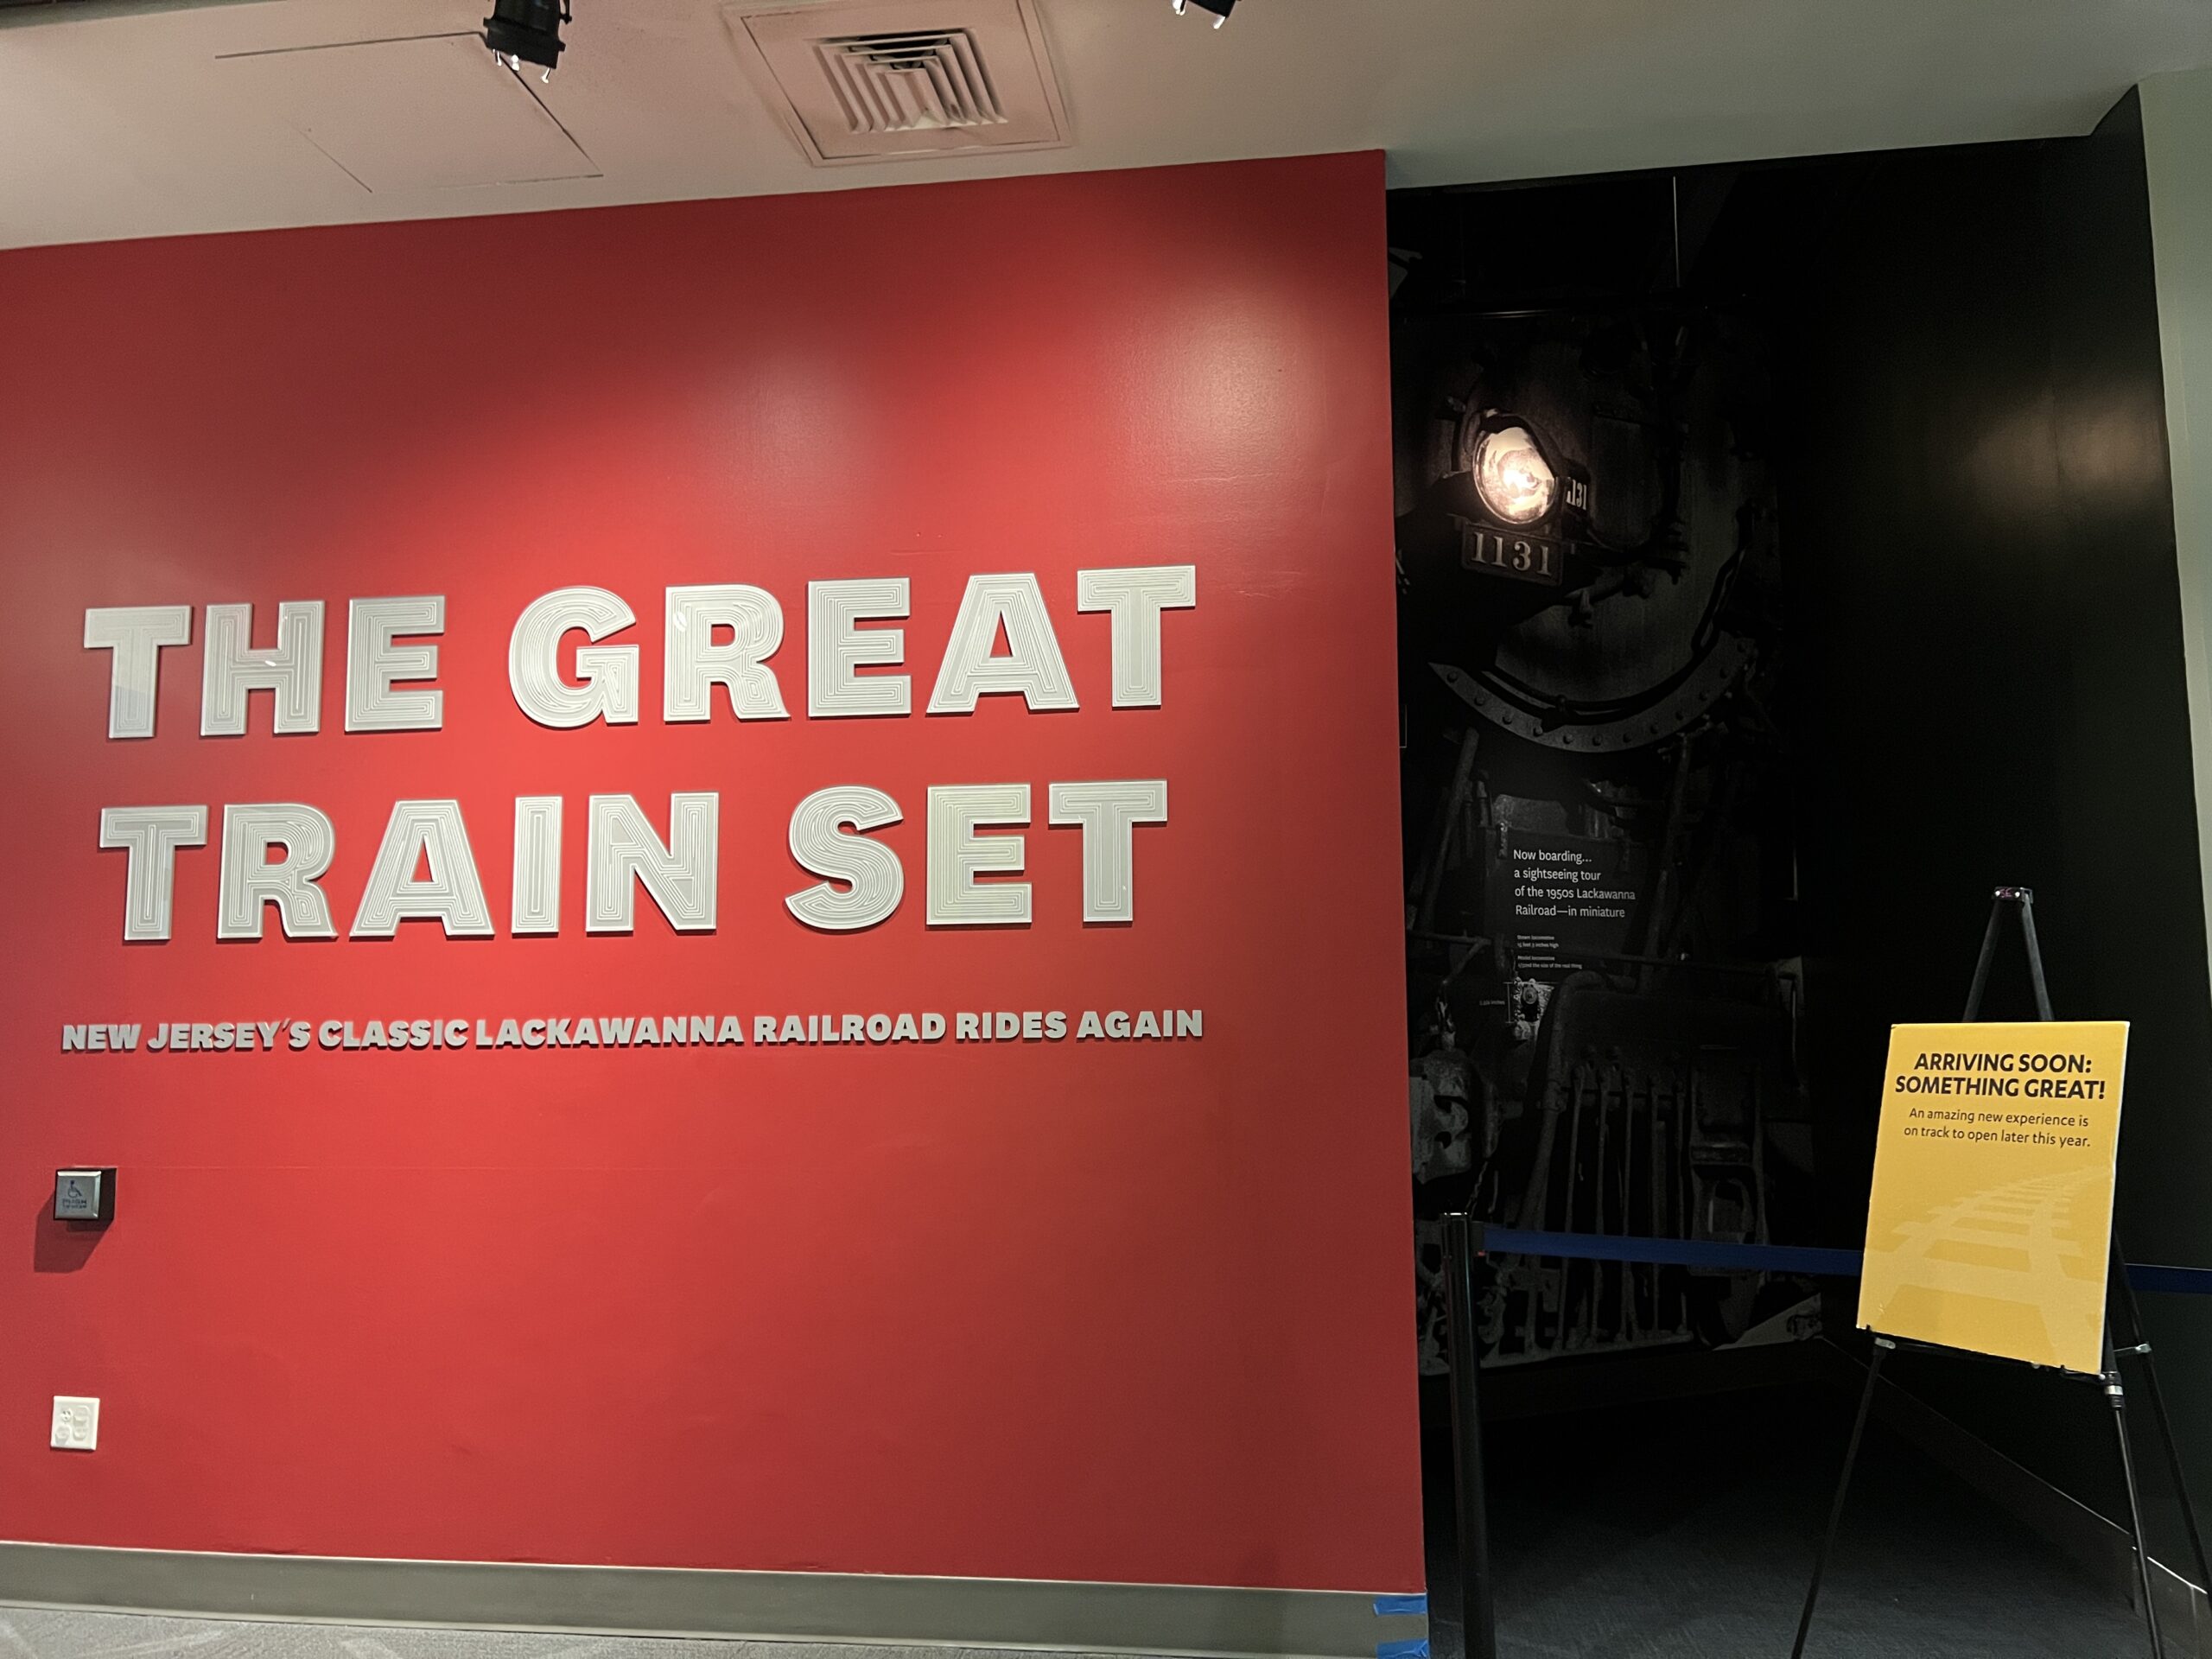 The Great Train Set entrance mural at the Liberty Science Center in Jersey City NJ